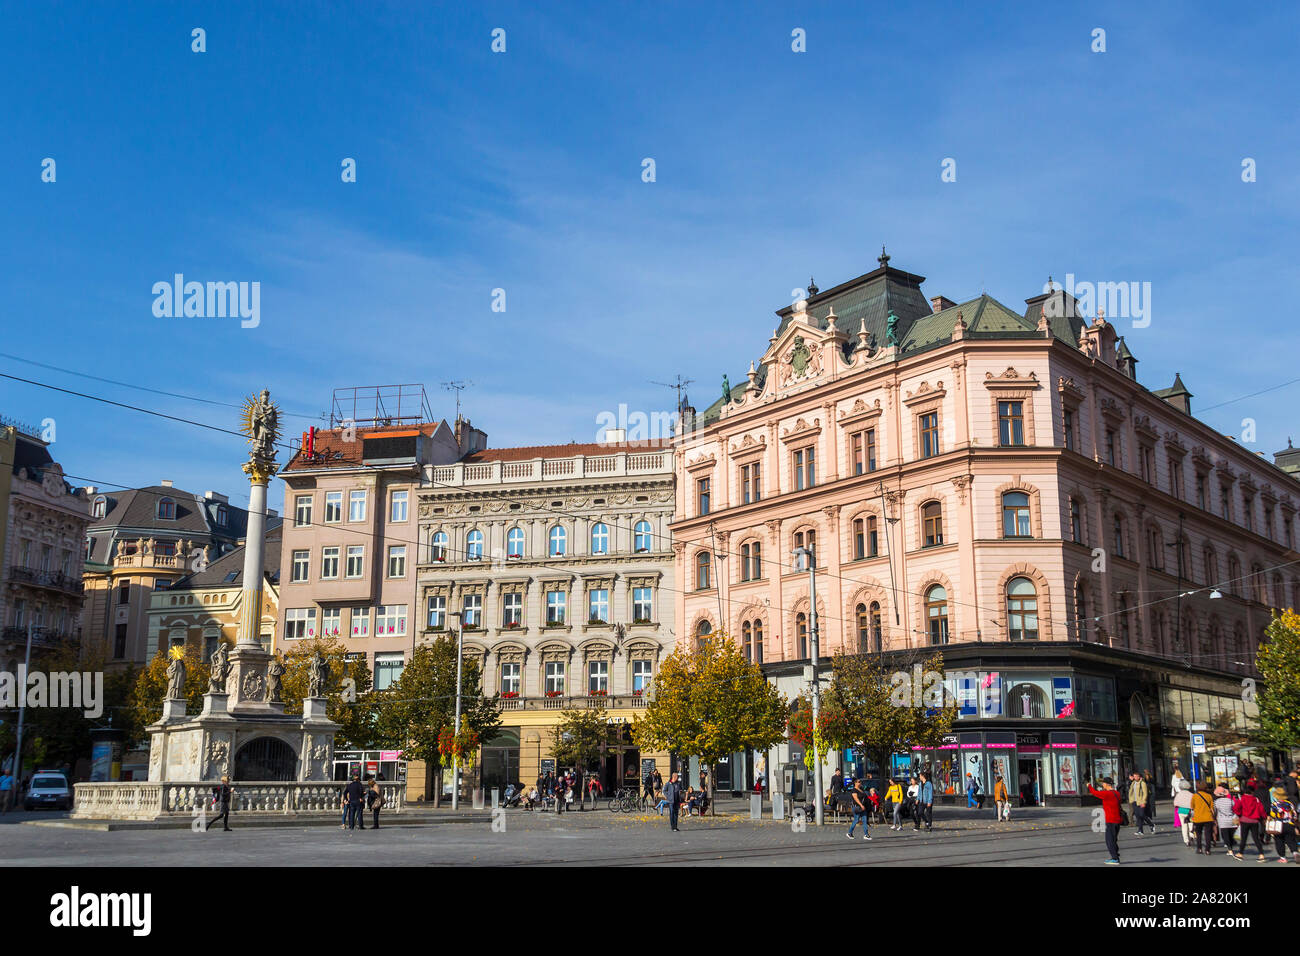 BRNO, CZECH REPUBLIC - OCTOBER 23, 2019: Freedom square (Namesti Svobody) and Plague column in the heart of Brno old town Stock Photo